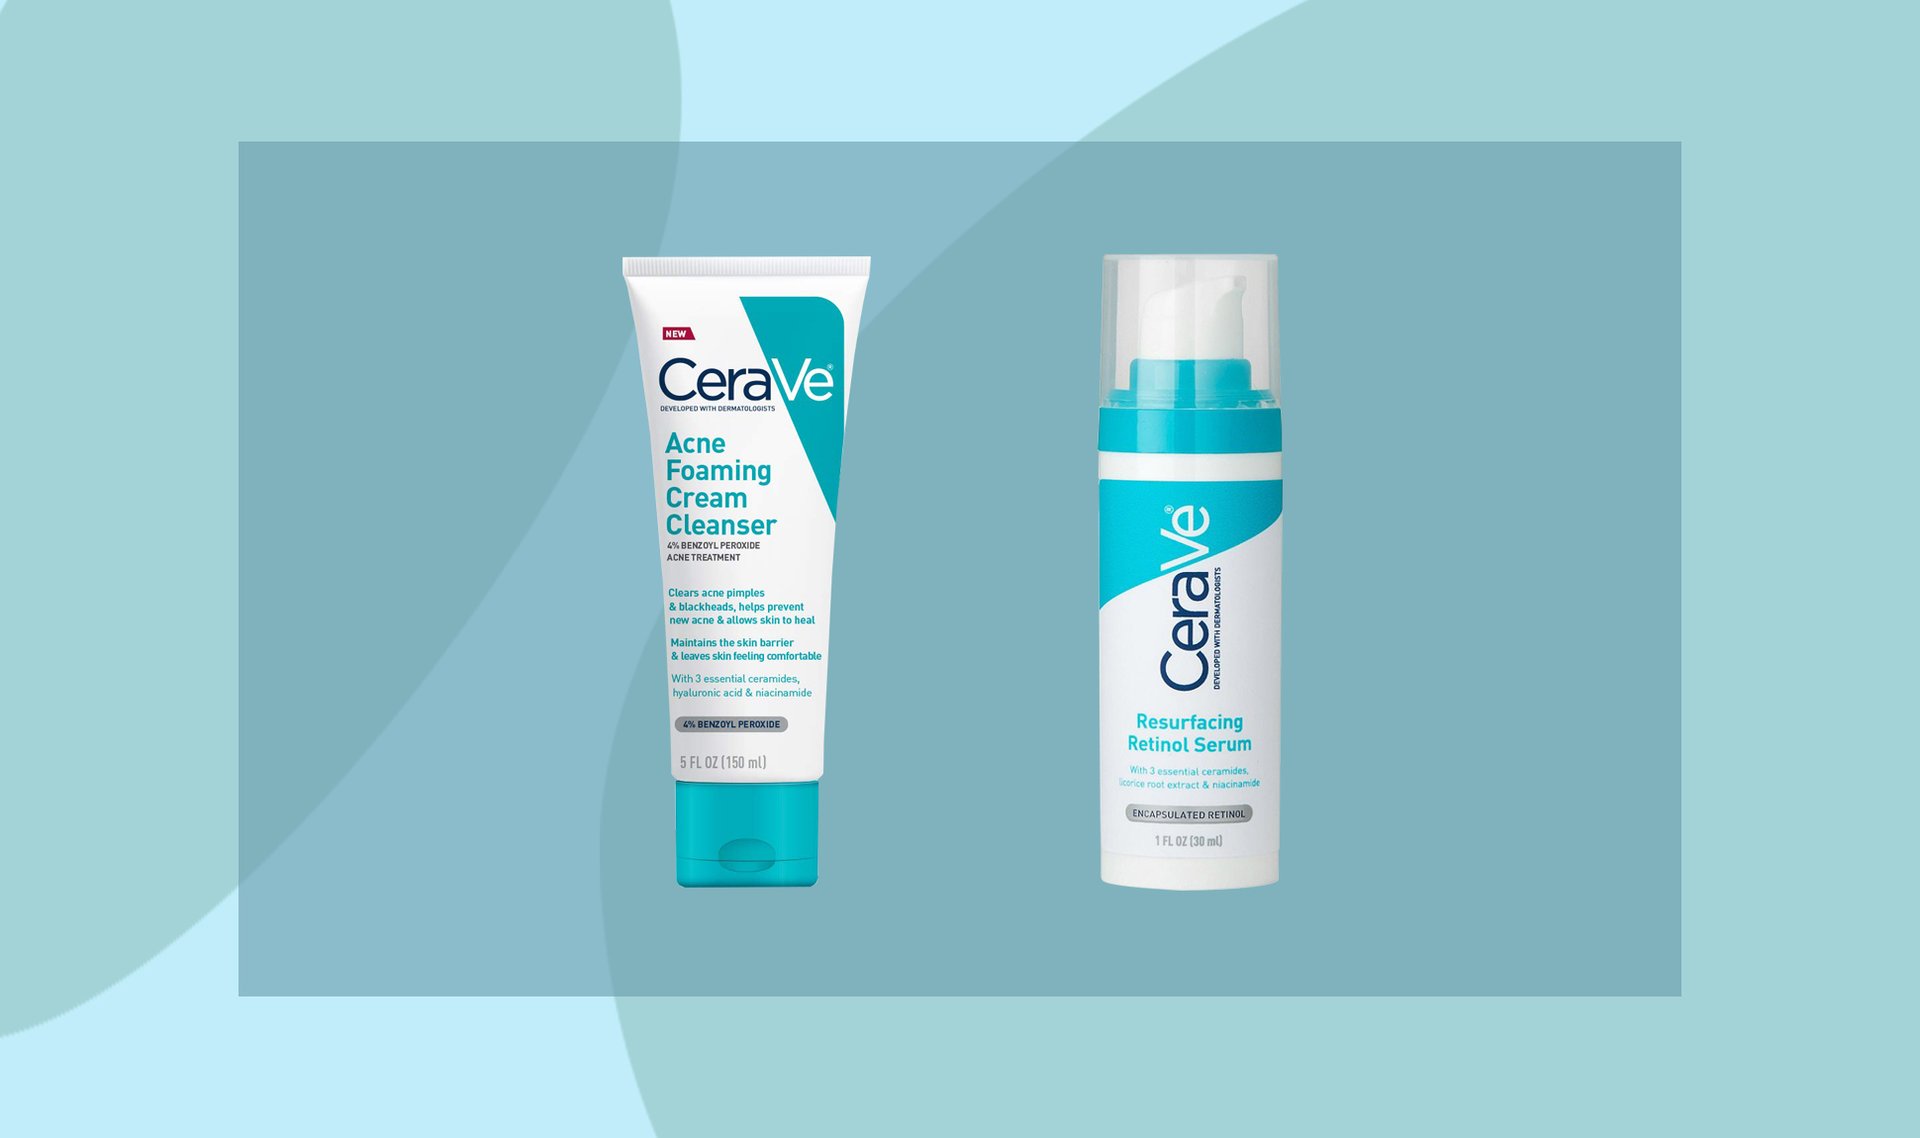 Why the CeraVe Resurfacing Retinol Serum and the Acne Foaming Cream Cleanser Are the Best Acne-Fighting Duo